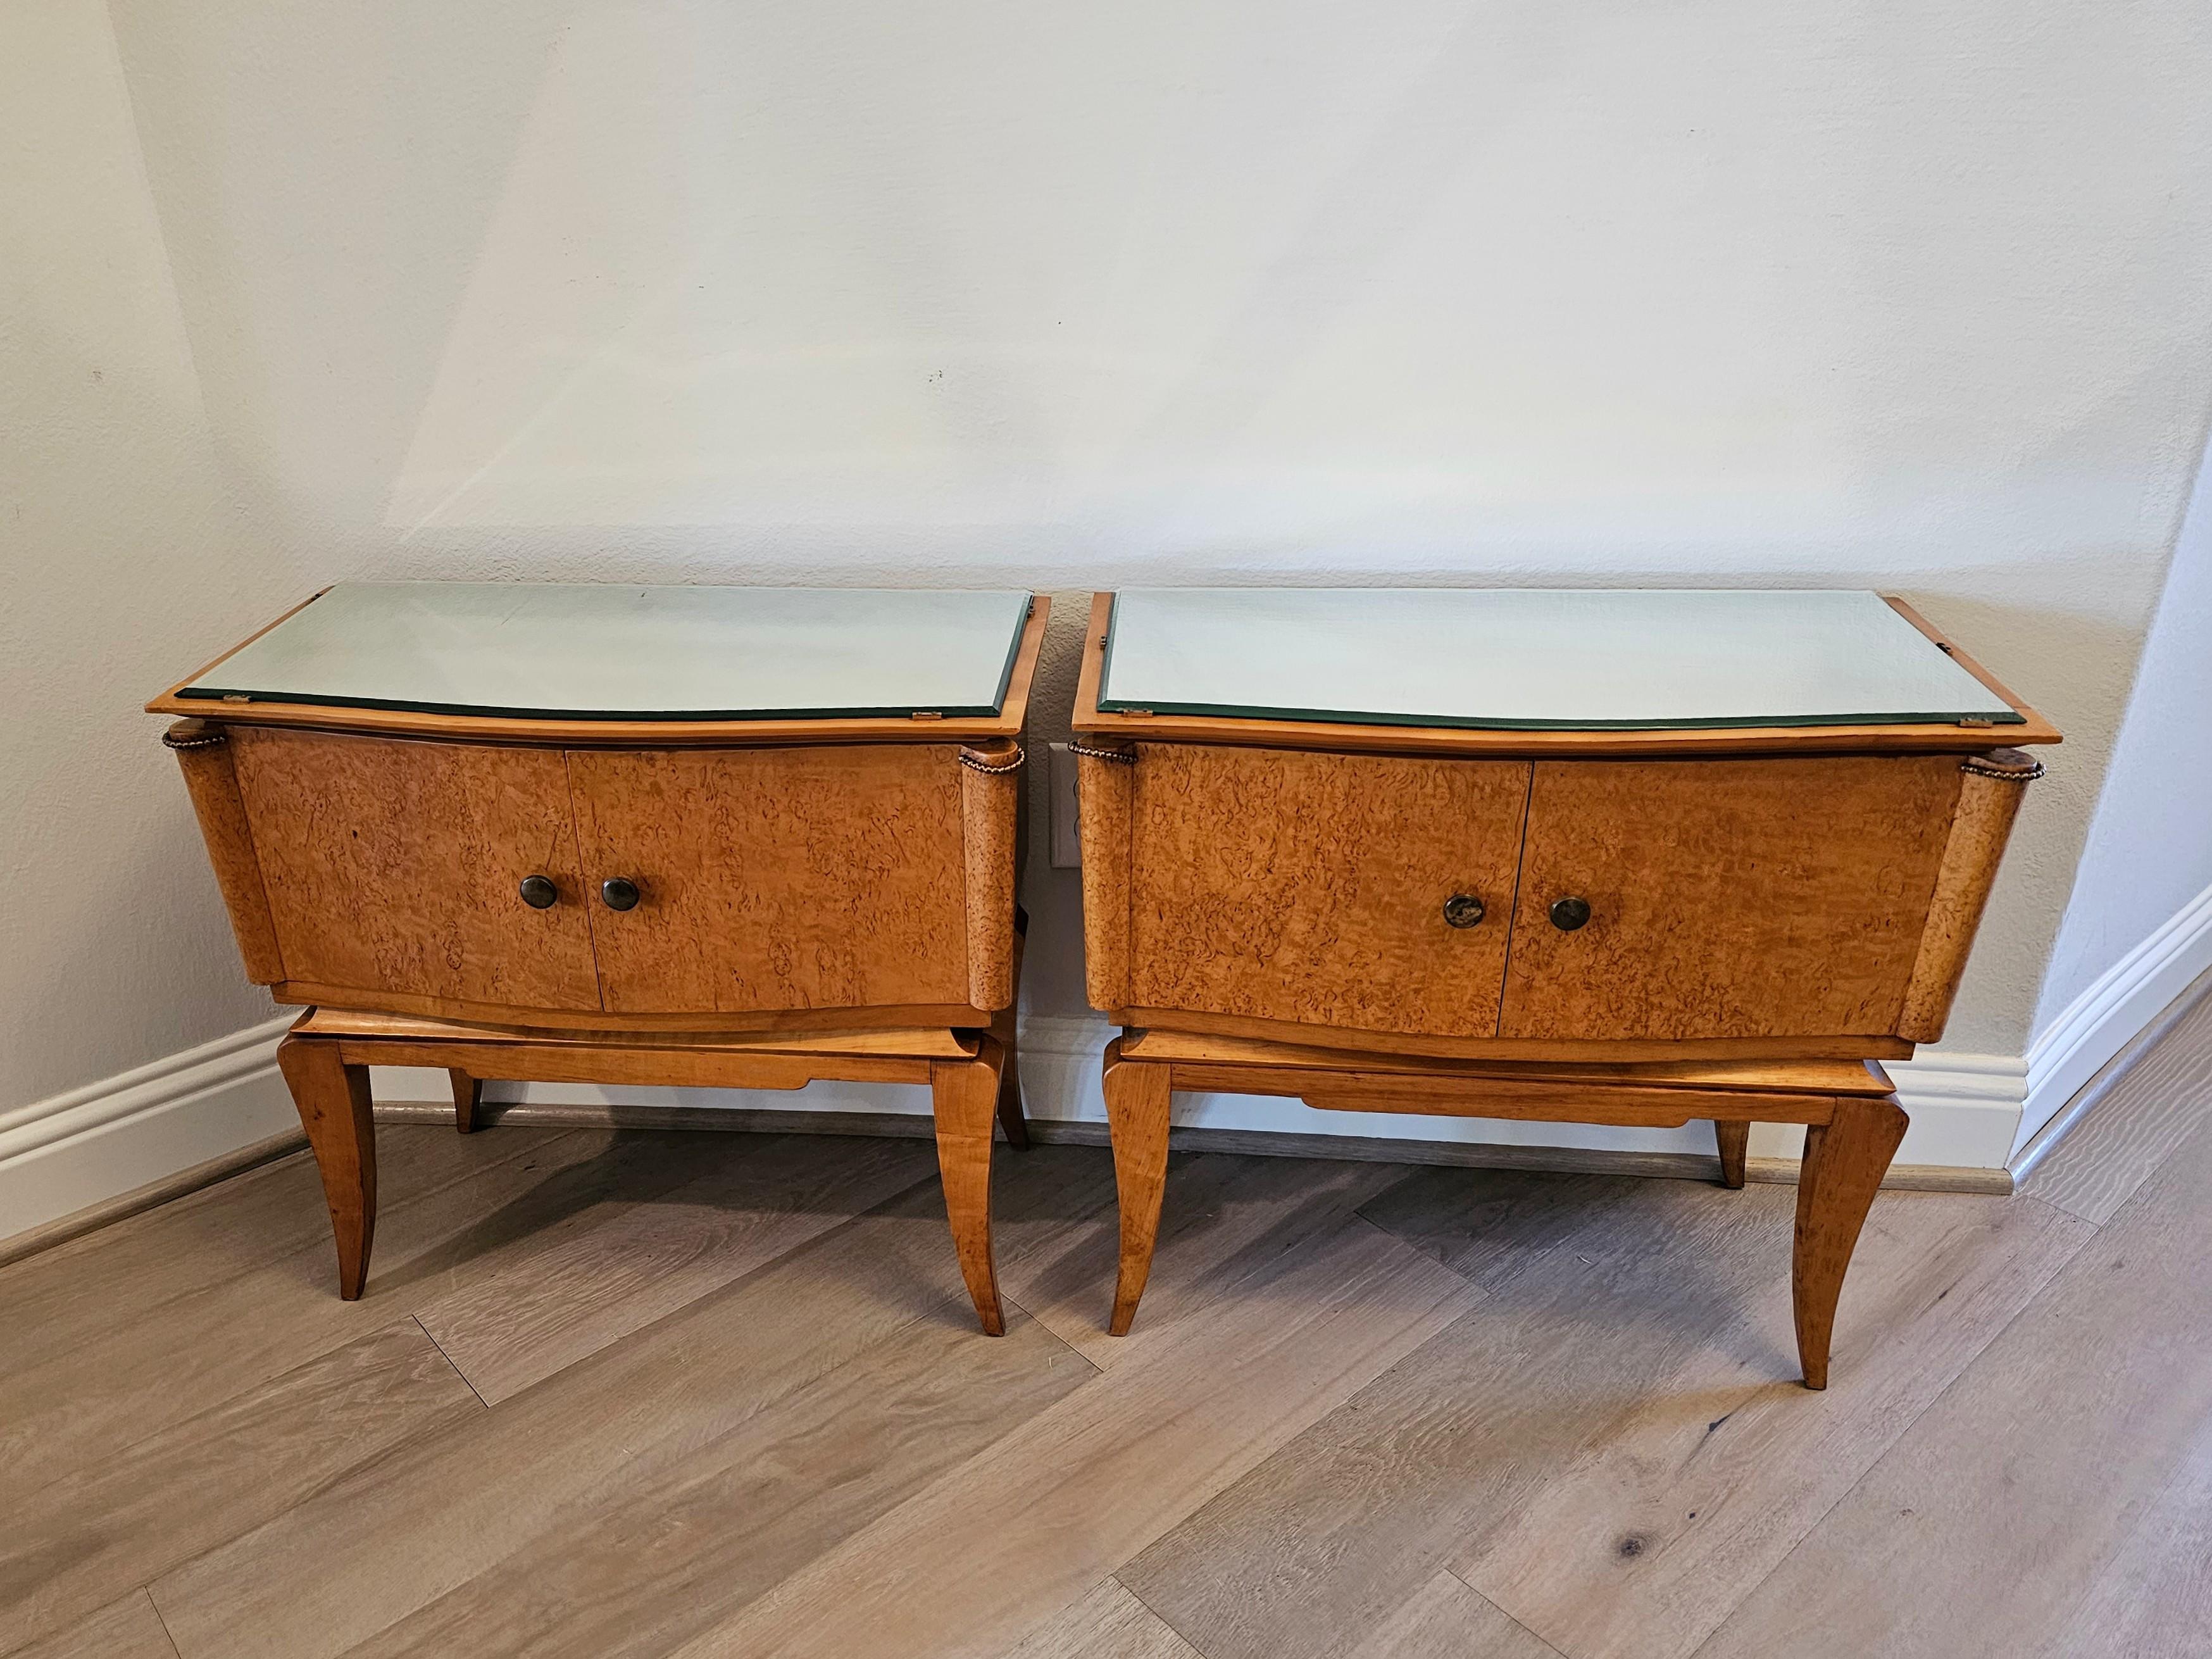 Hand-Crafted Mid-Century French Modern Burled Maple Mirrored Glass Nightstand Tables